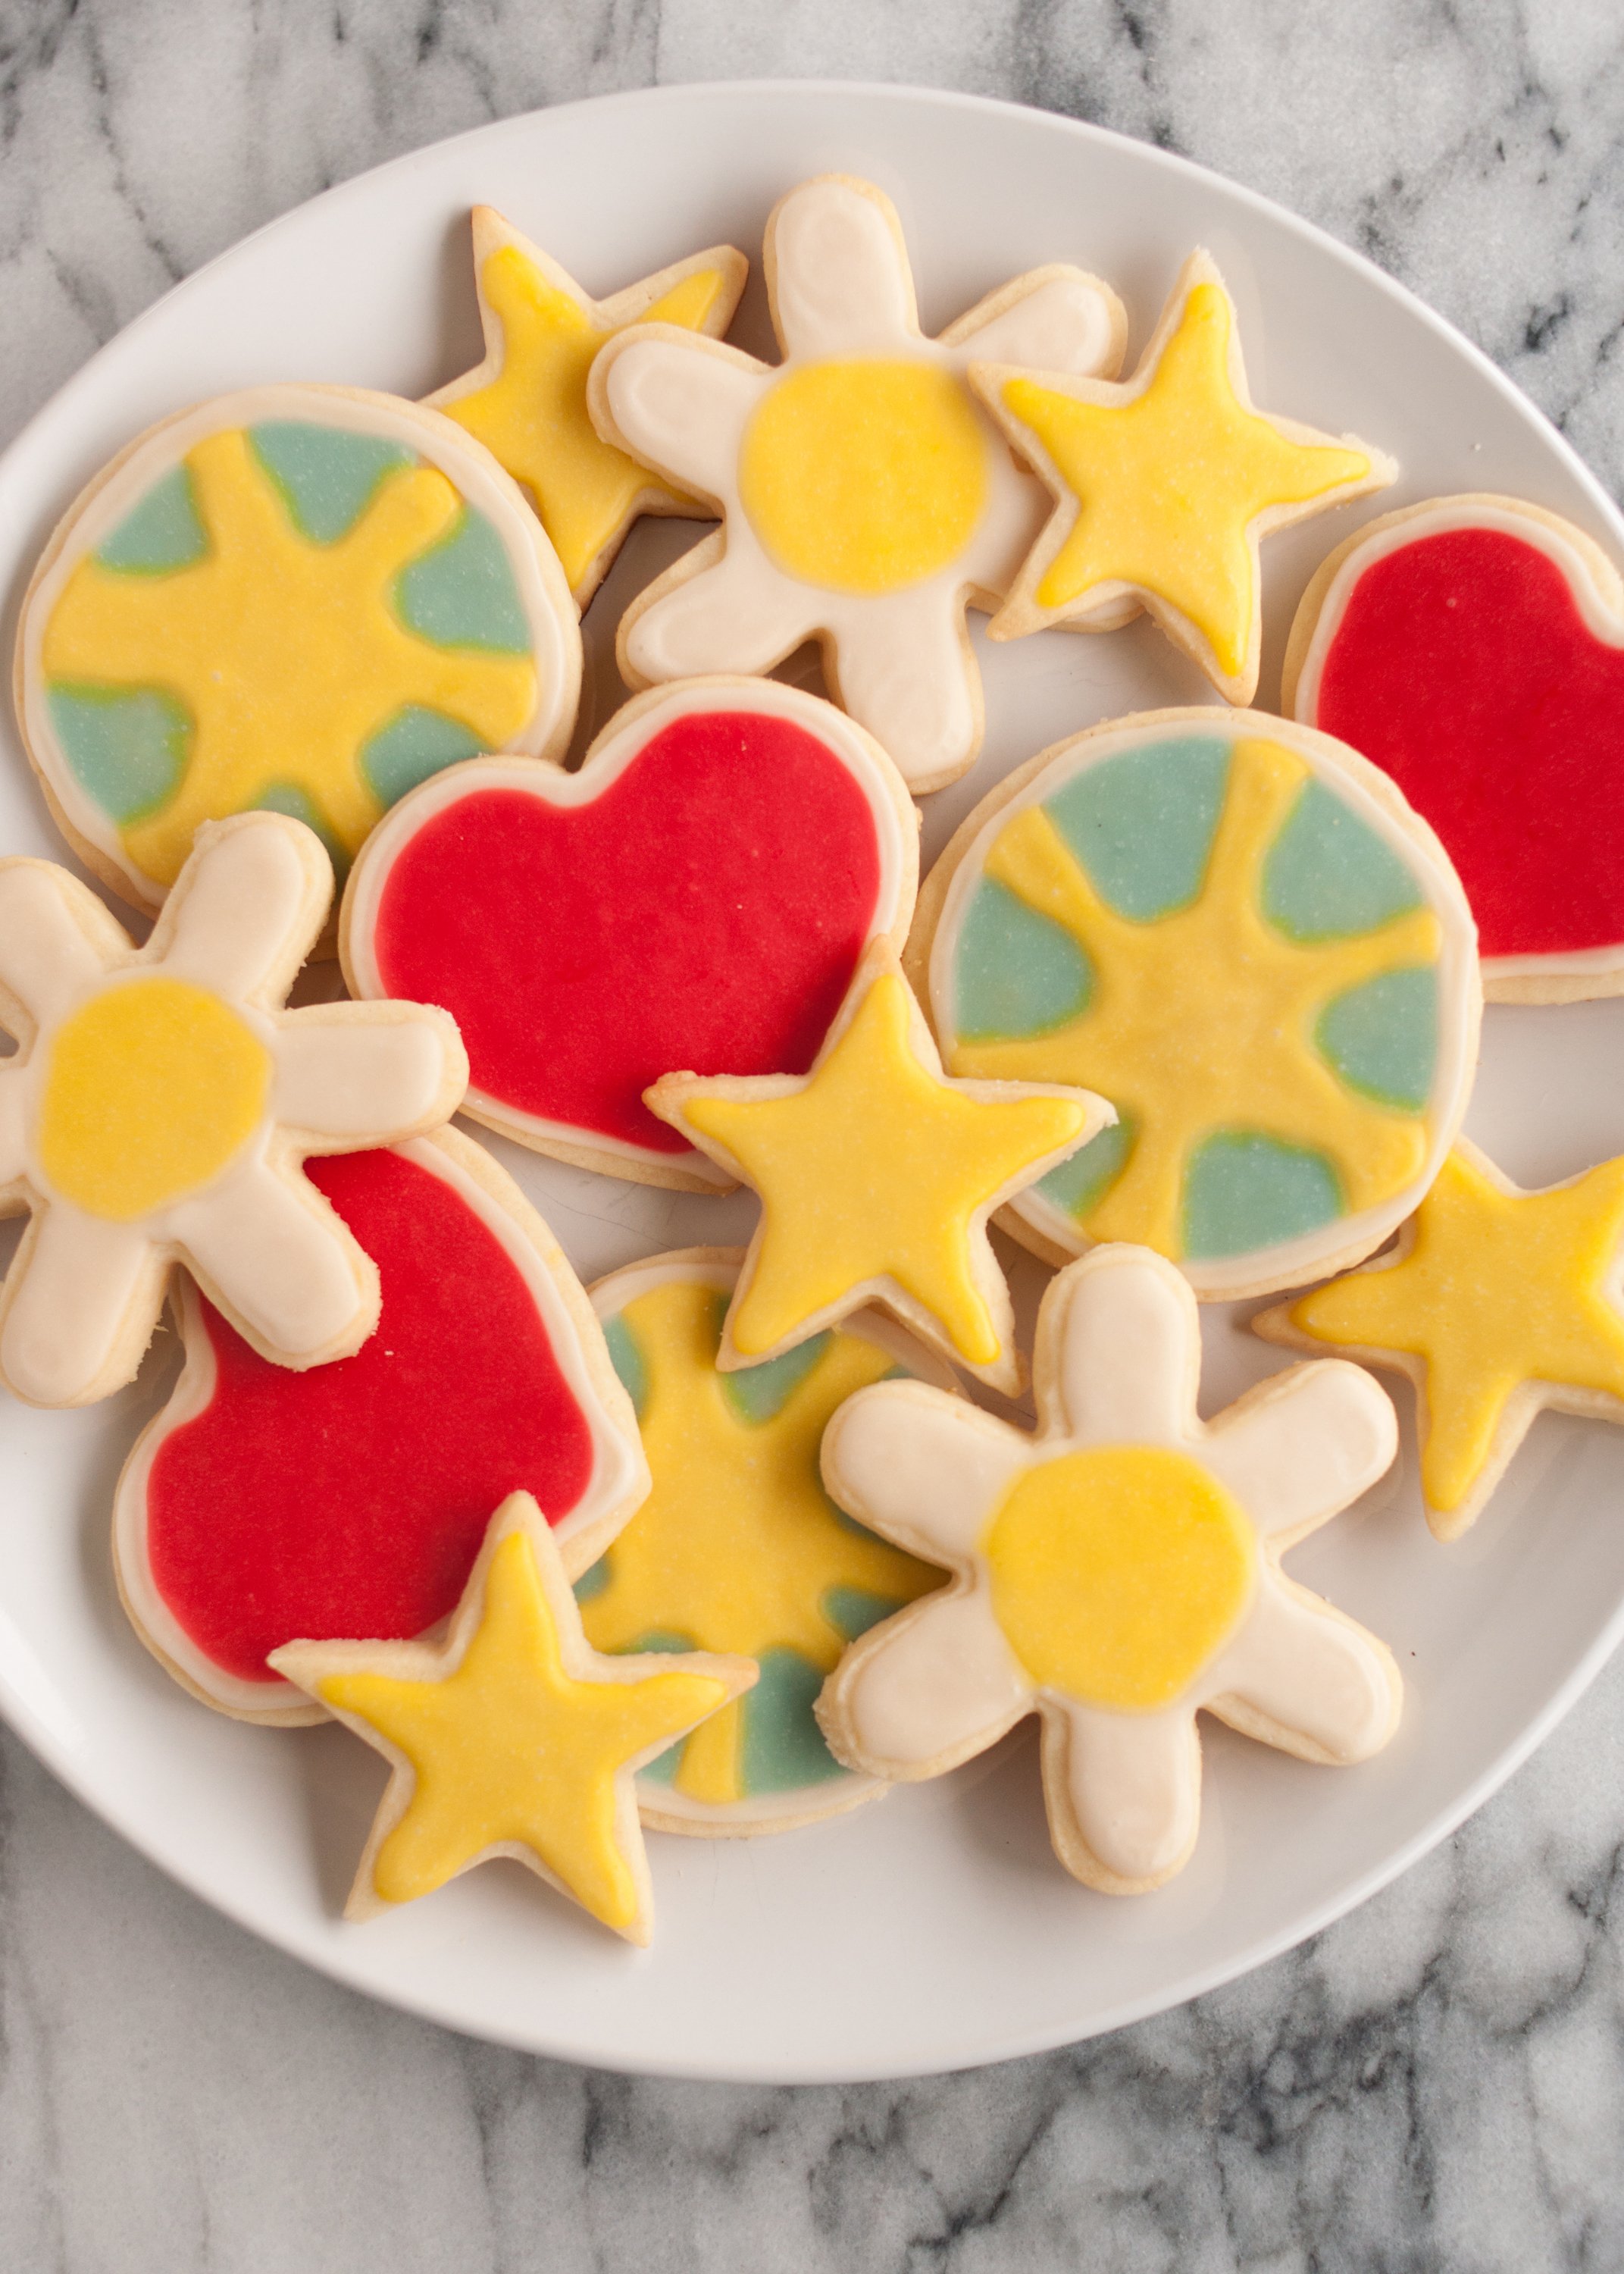 How To Make Cut Out Sugar Cookies Kitchn